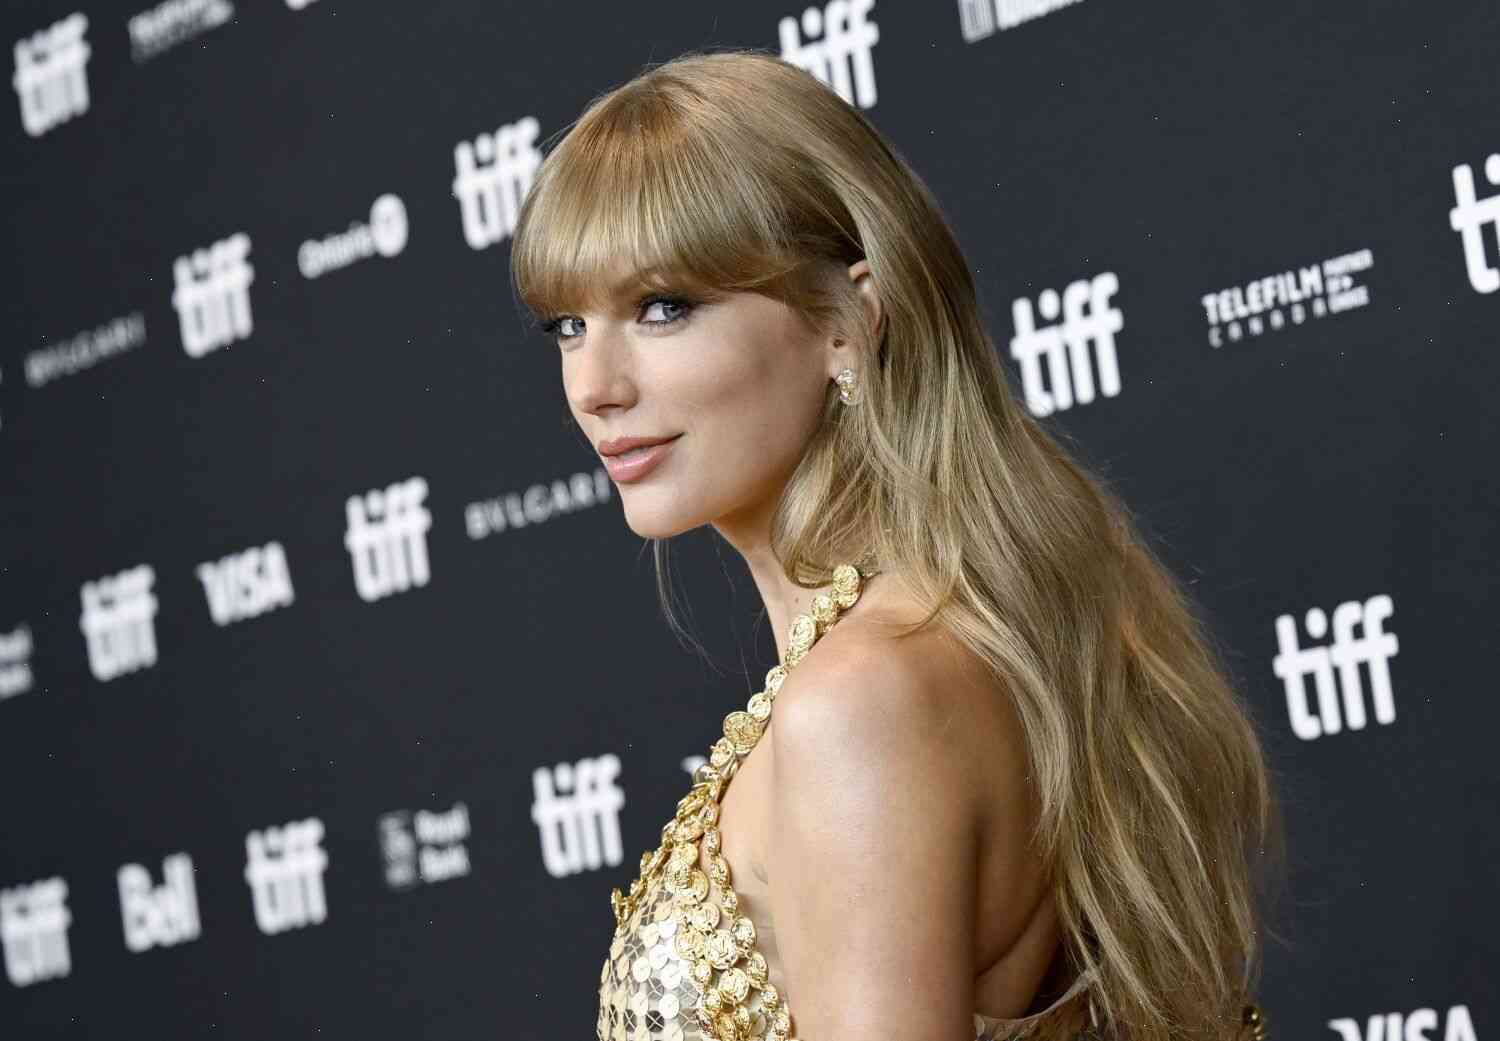 Taylor Swift’s Reputation: What Does It Mean for Swift?